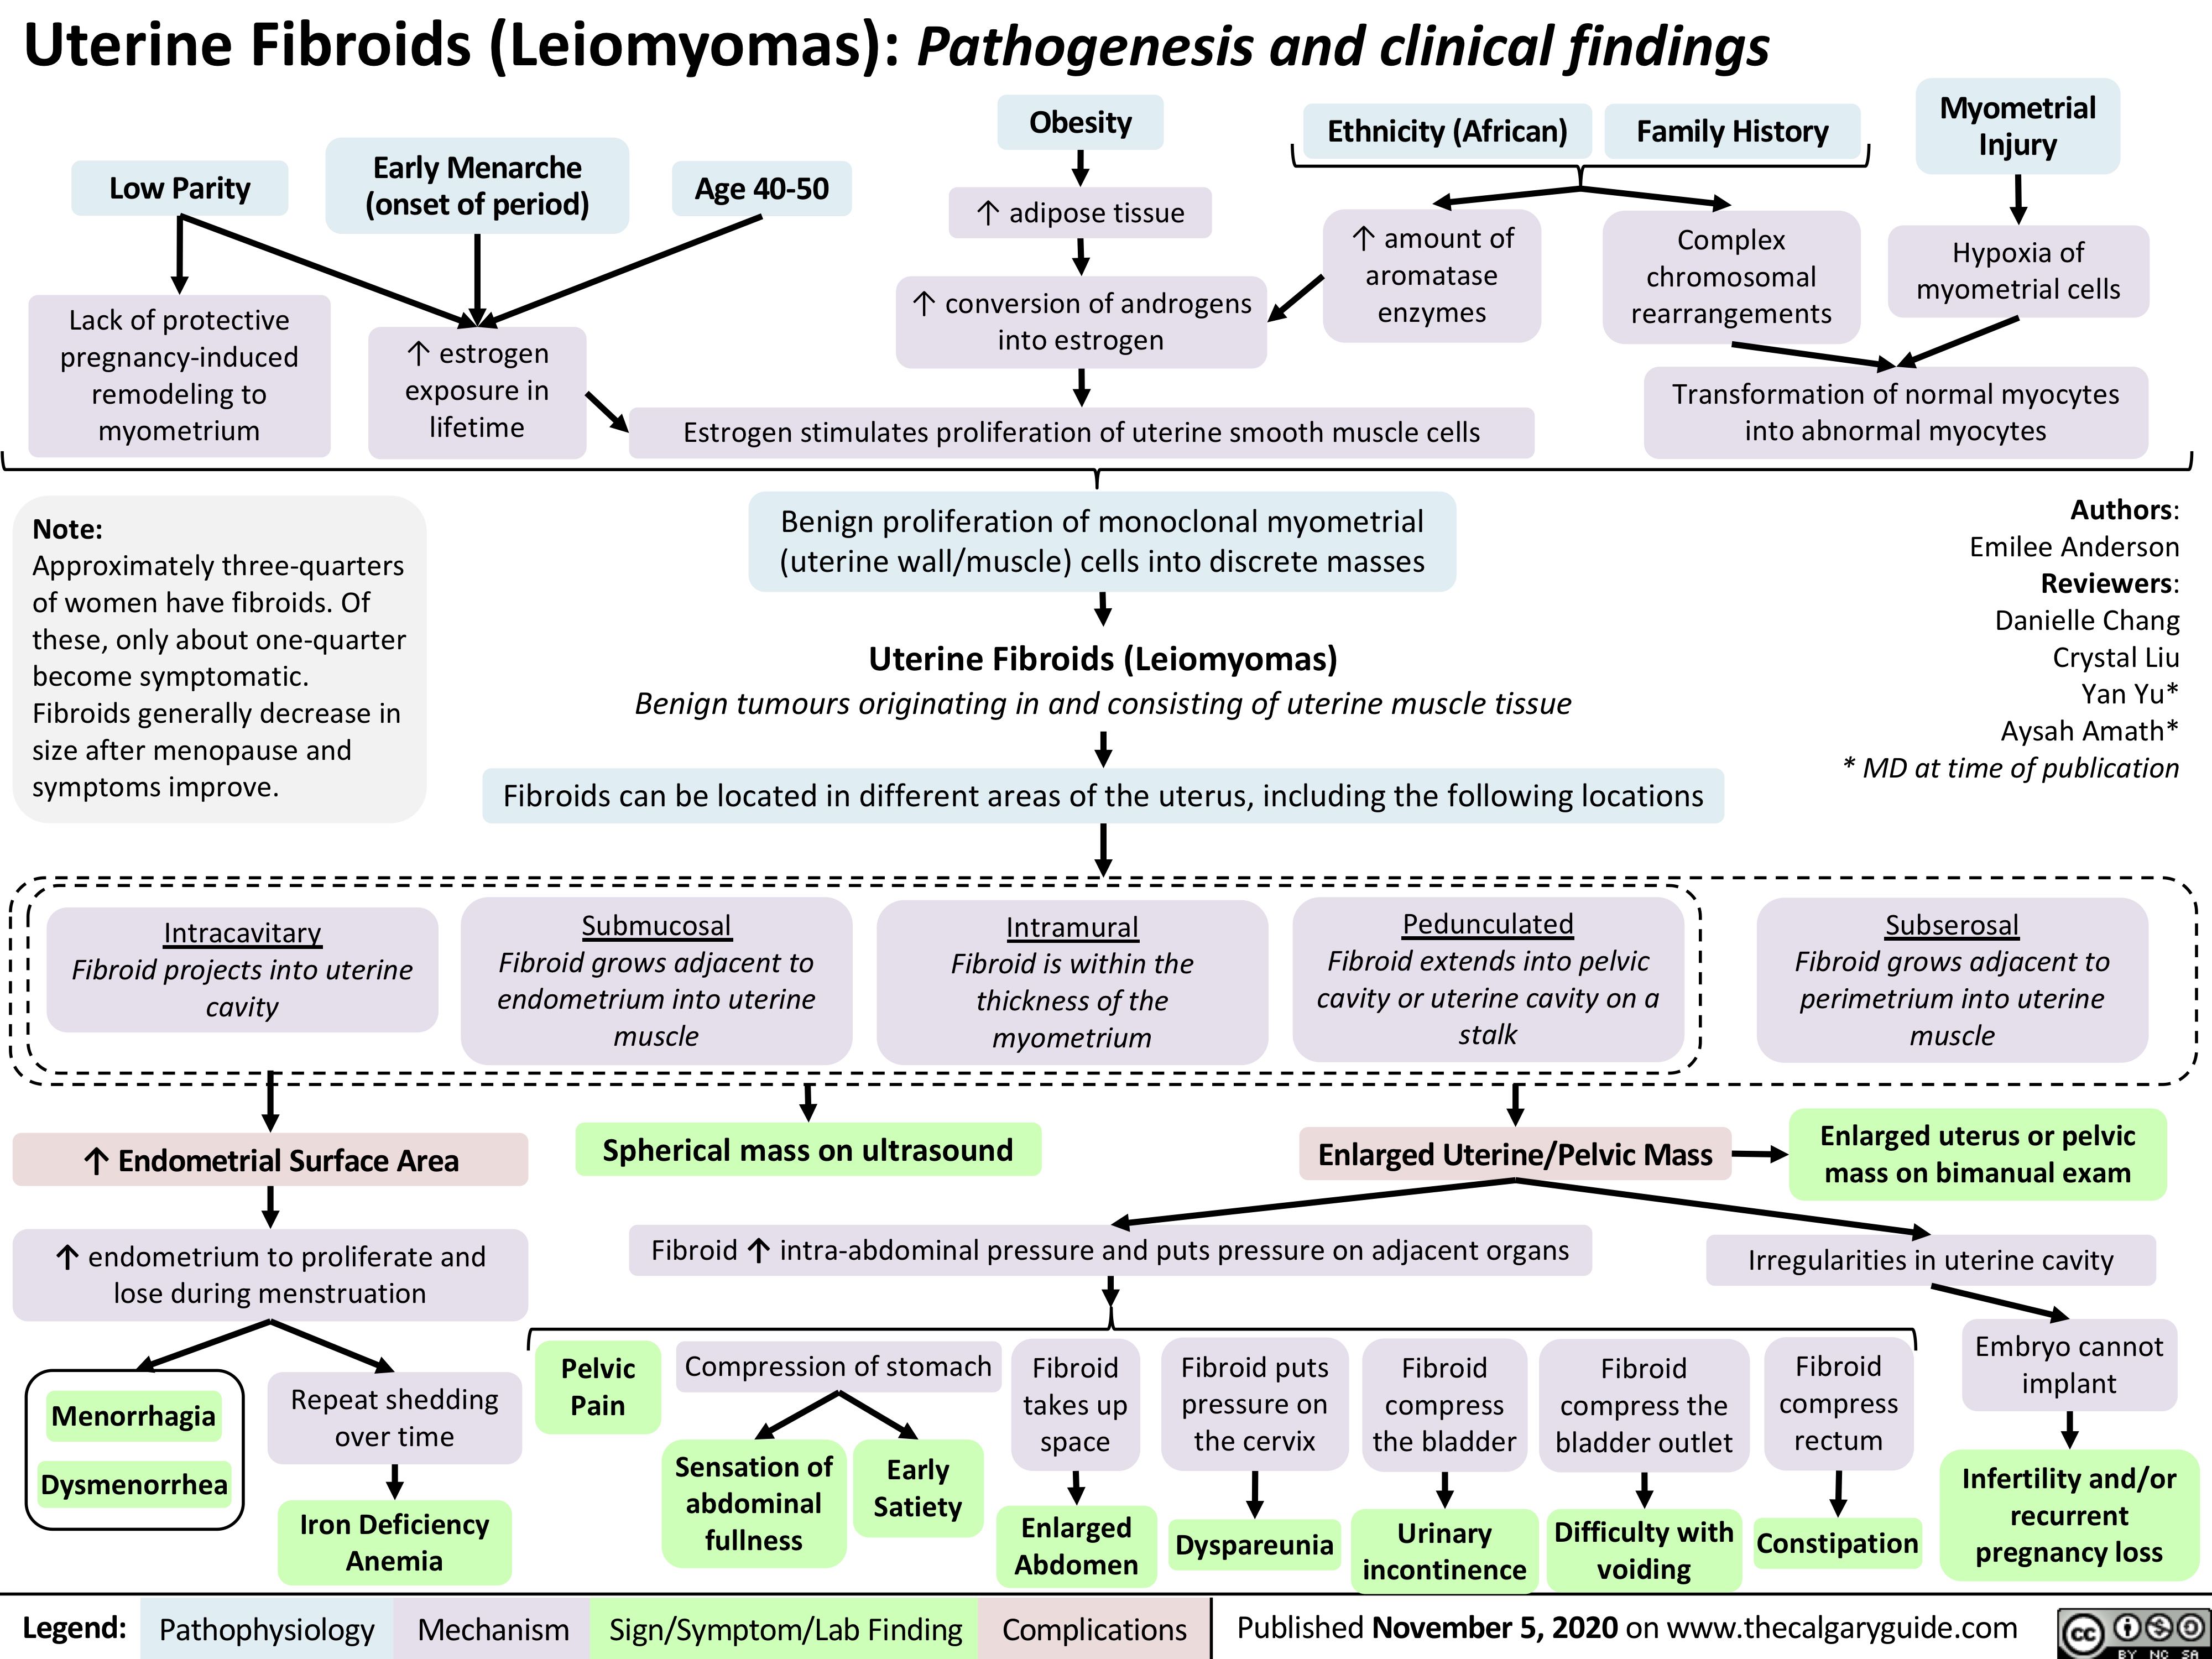 Uterine Fibroids (Leiomyomas): Pathogenesis and clinical findings
      Early Menarche (onset of period)
↑ estrogen exposure in
Obesity
↑ adipose tissue
↑ conversion of androgens into estrogen
Ethnicity (African)
↑ amount of aromatase enzymes
Family History
Complex chromosomal rearrangements
Myometrial Injury
Hypoxia of myometrial cells
   Low Parity
Lack of protective pregnancy-induced remodeling to myometrium
Note:
Approximately three-quarters of women have fibroids. Of these, only about one-quarter become symptomatic. Fibroids generally decrease in size after menopause and symptoms improve.
Intracavitary
Fibroid projects into uterine cavity
↑ Endometrial Surface Area ↑ endometrium to proliferate and
lose during menstruation
Age 40-50
                  lifetime       Estrogen stimulates proliferation of uterine smooth muscle cells
Benign proliferation of monoclonal myometrial (uterine wall/muscle) cells into discrete masses
Uterine Fibroids (Leiomyomas)
Benign tumours originating in and consisting of uterine muscle tissue
Fibroids can be located in different areas of the uterus, including the following locations
Authors: Emilee Anderson Reviewers: Danielle Chang Crystal Liu Yan Yu* Aysah Amath* * MD at time of publication
Subserosal
Fibroid grows adjacent to perimetrium into uterine muscle
Enlarged uterus or pelvic mass on bimanual exam
Irregularities in uterine cavity
Transformation of normal myocytes into abnormal myocytes
            Submucosal
Fibroid grows adjacent to endometrium into uterine muscle
Intramural
Fibroid is within the thickness of the myometrium
Pedunculated
Fibroid extends into pelvic cavity or uterine cavity on a stalk
            Spherical mass on ultrasound
Fibroid ↑ intra-abdominal pressure and puts pressure on adjacent organs
Enlarged Uterine/Pelvic Mass
                      Repeat shedding over time
Iron Deficiency Anemia
Pelvic Pain
Compression of stomach
Fibroid takes up space
Enlarged Abdomen
Fibroid puts pressure on the cervix
Dyspareunia
Fibroid compress the bladder
Urinary incontinence
Fibroid compress the bladder outlet
Difficulty with voiding
Fibroid compress rectum
Constipation
Embryo cannot implant
Infertility and/or recurrent pregnancy loss
 Menorrhagia Dysmenorrhea
Sensation of abdominal fullness
Early Satiety
                 Legend:
 Pathophysiology
 Mechanism
Sign/Symptom/Lab Finding
  Complications
Published November 5, 2020 on www.thecalgaryguide.com
   